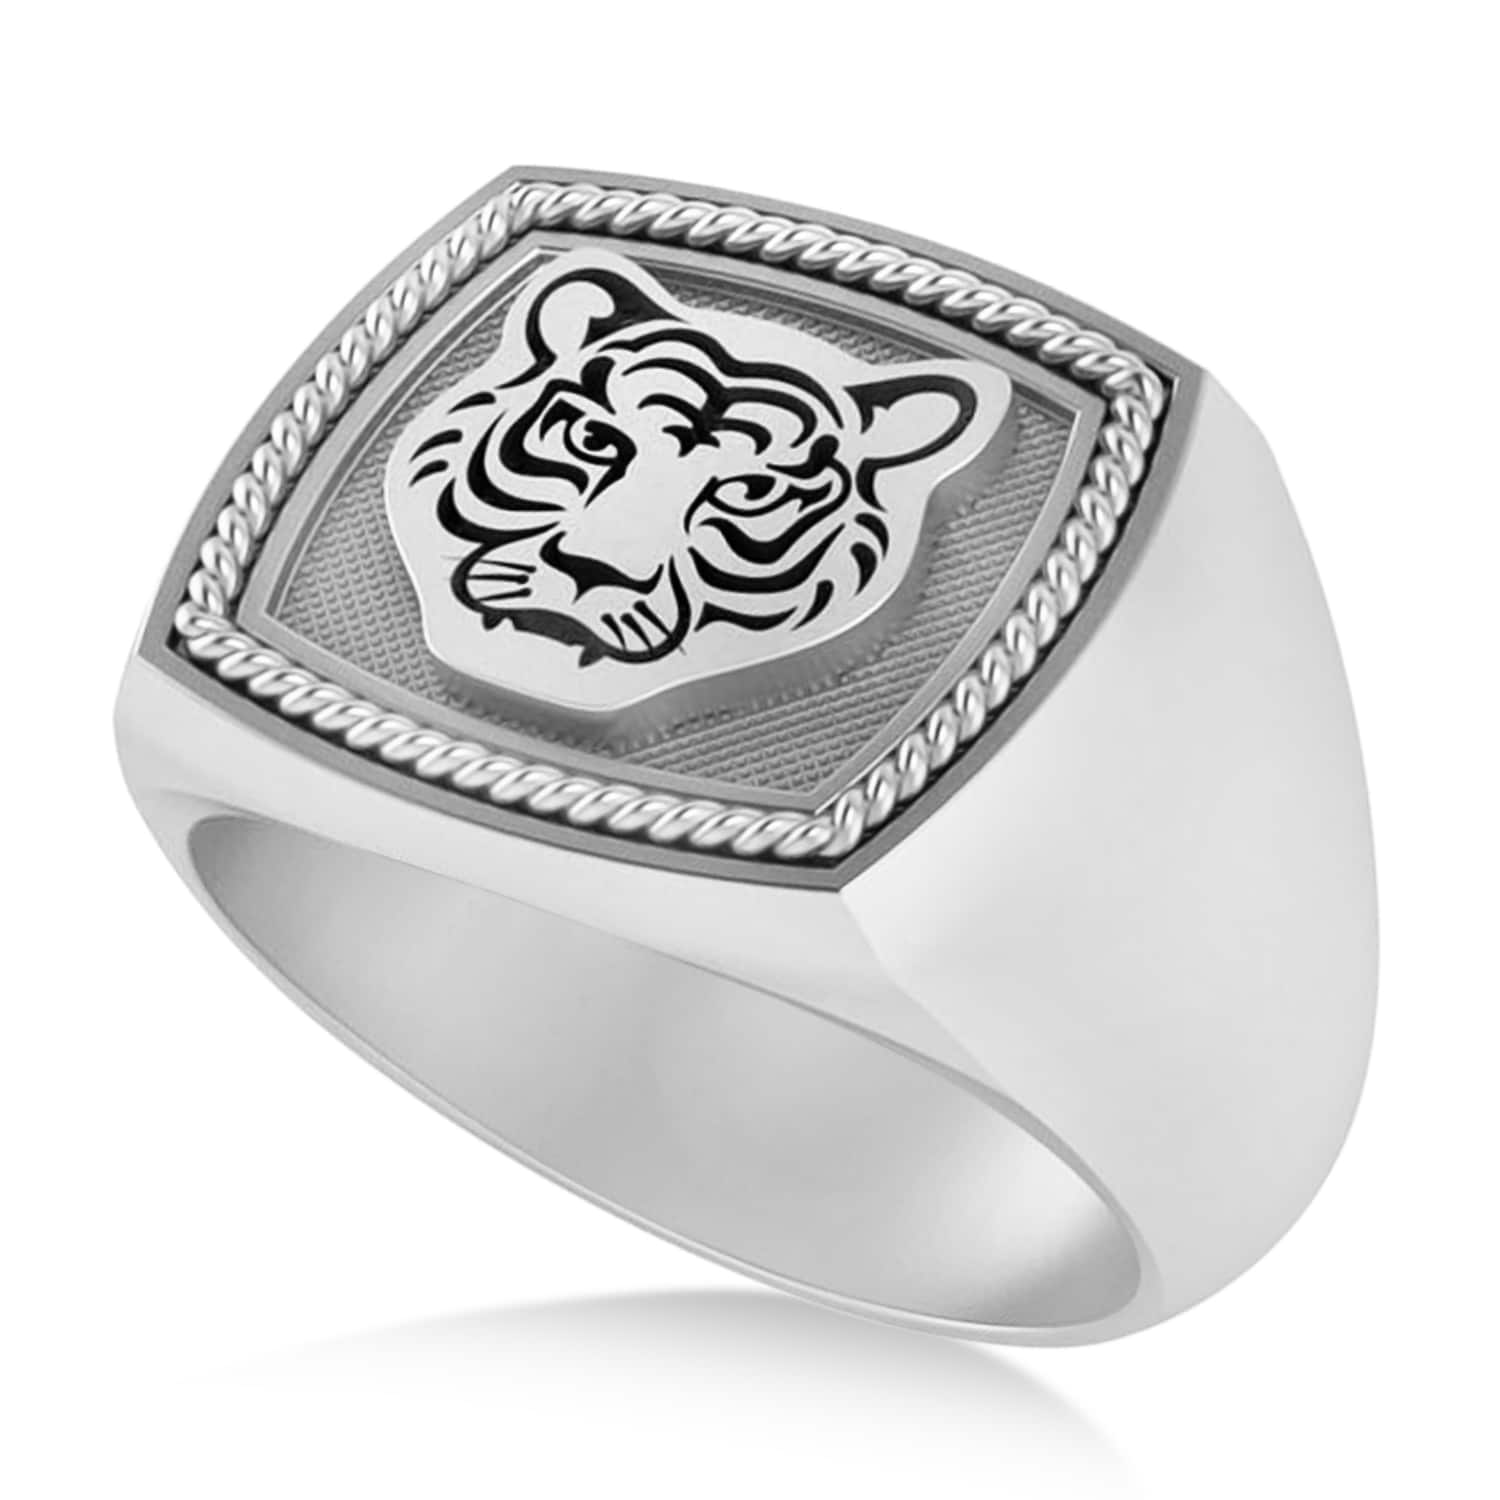 Tiger's Face Shaped Gents Ring 14k White Gold